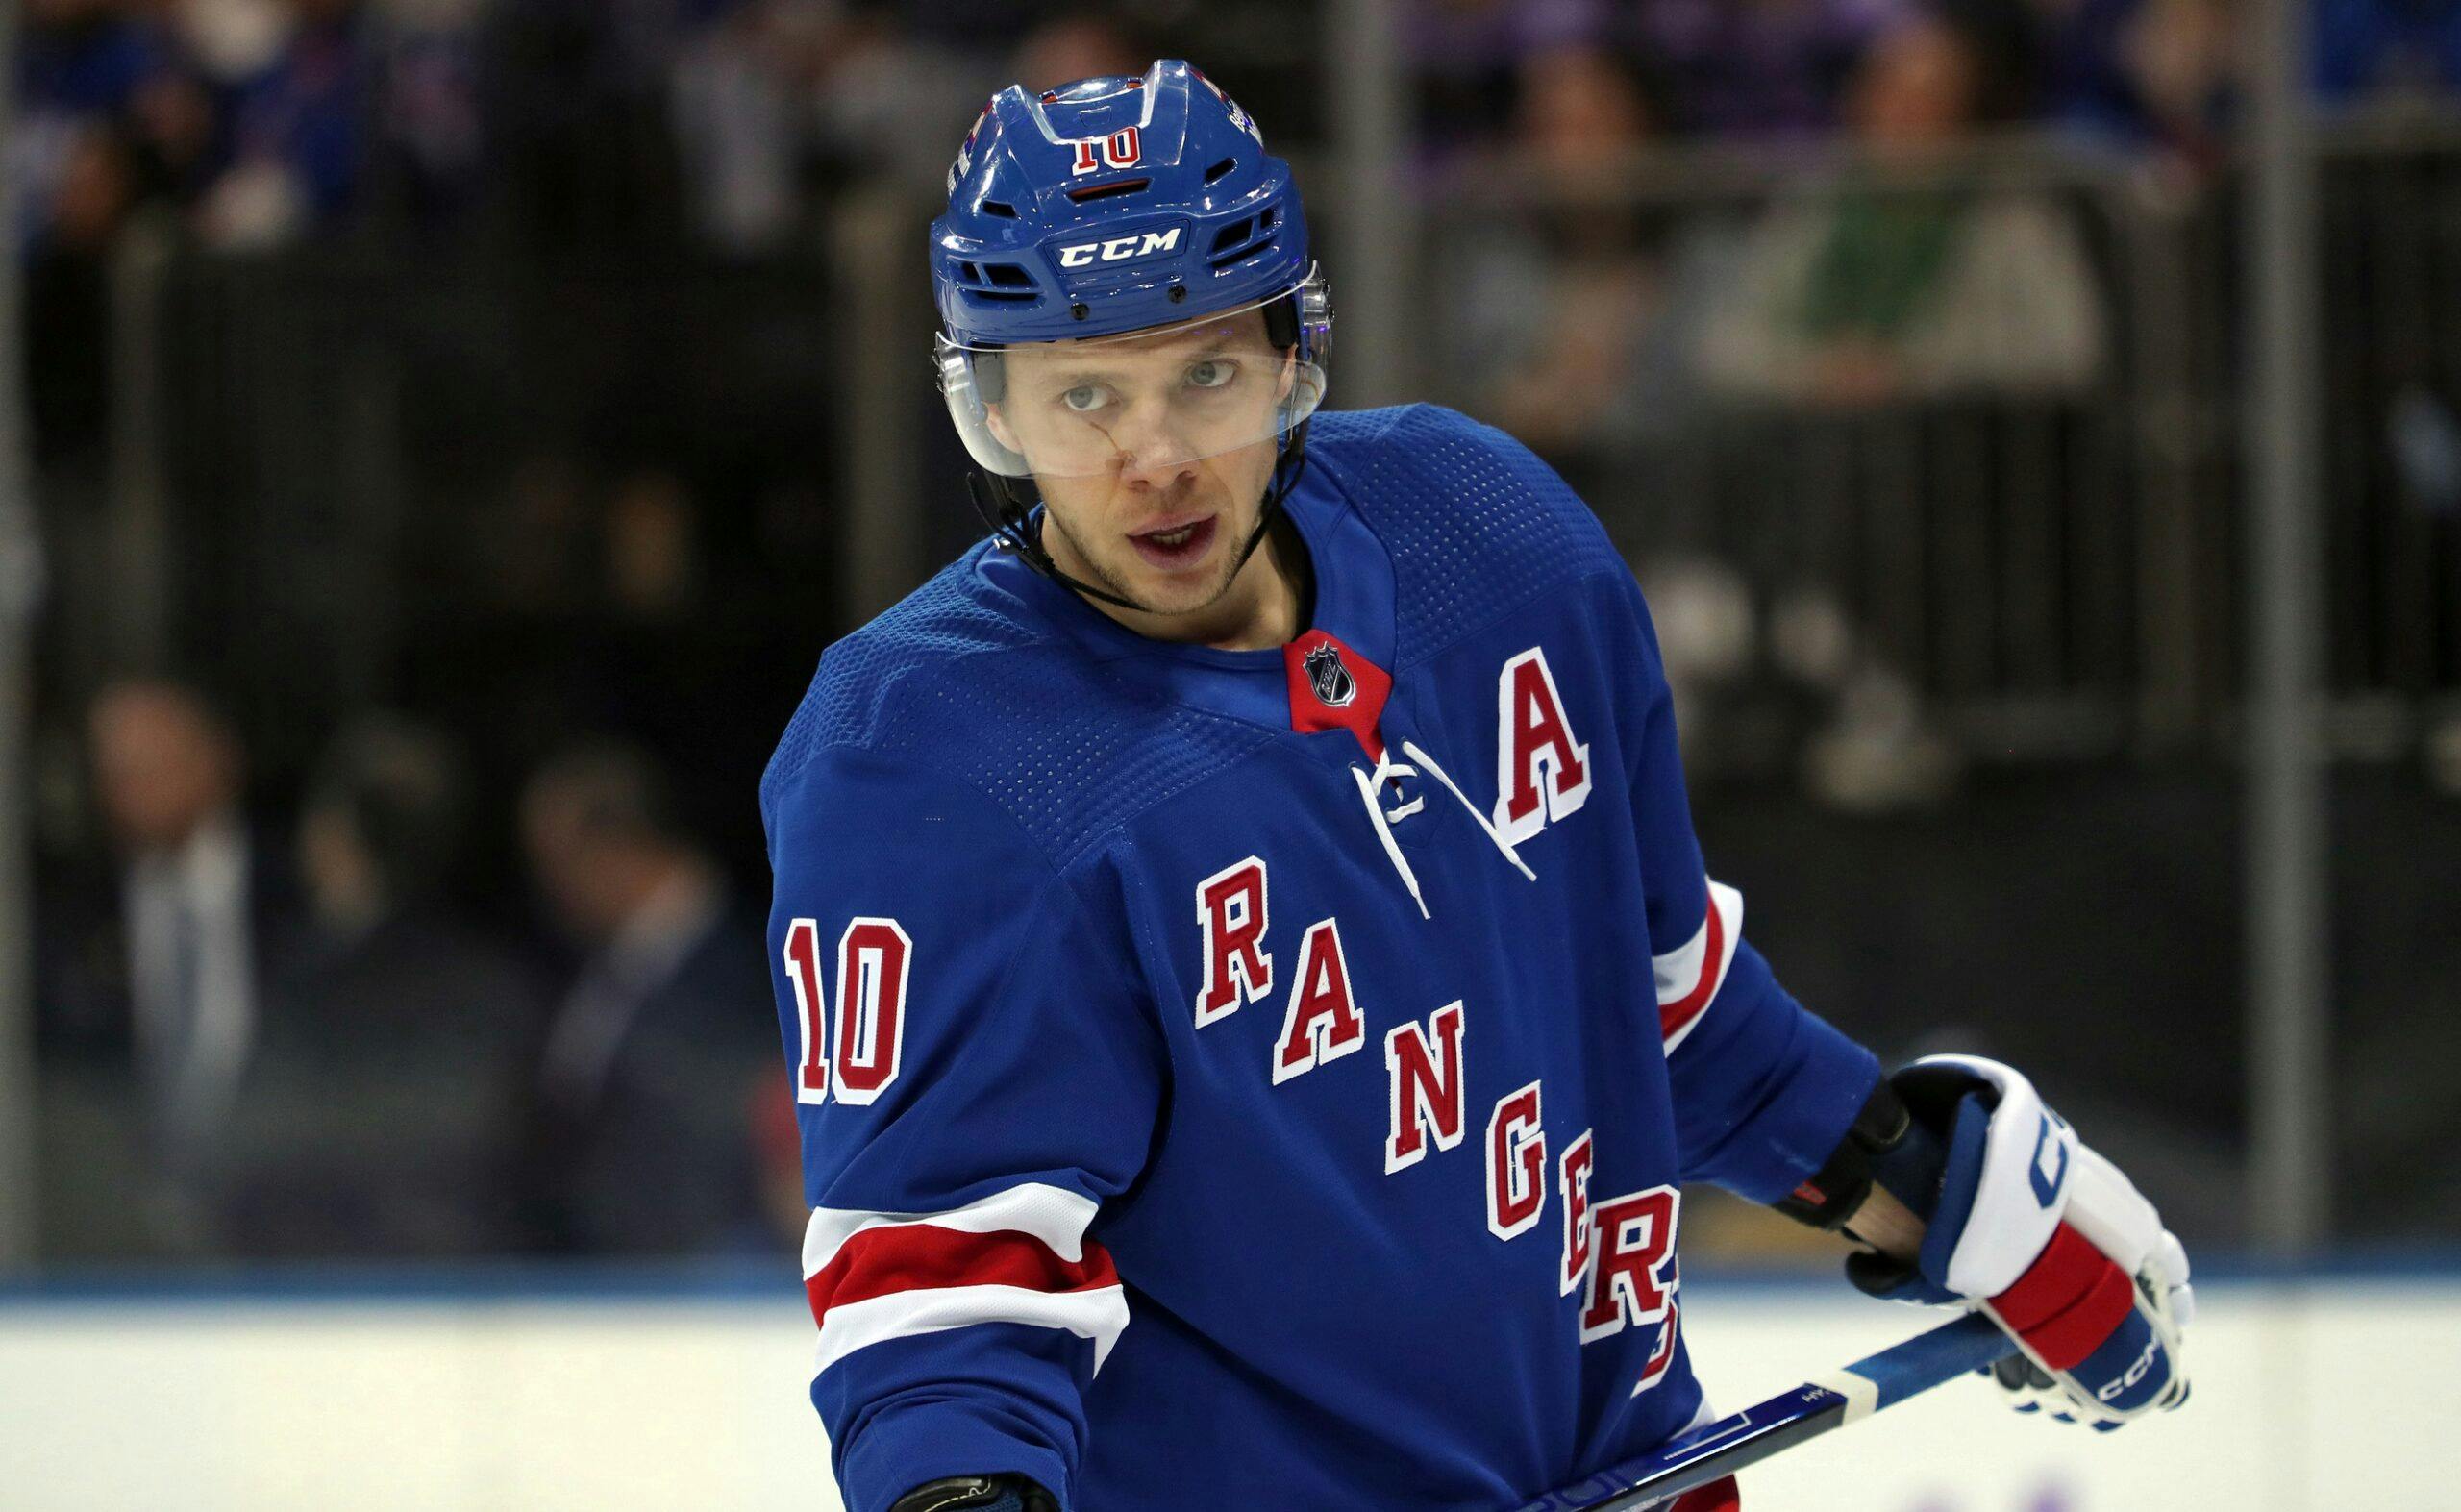 New York Rangers’ Artemi Panarin asks fans to vote for teammates as wife expects second child